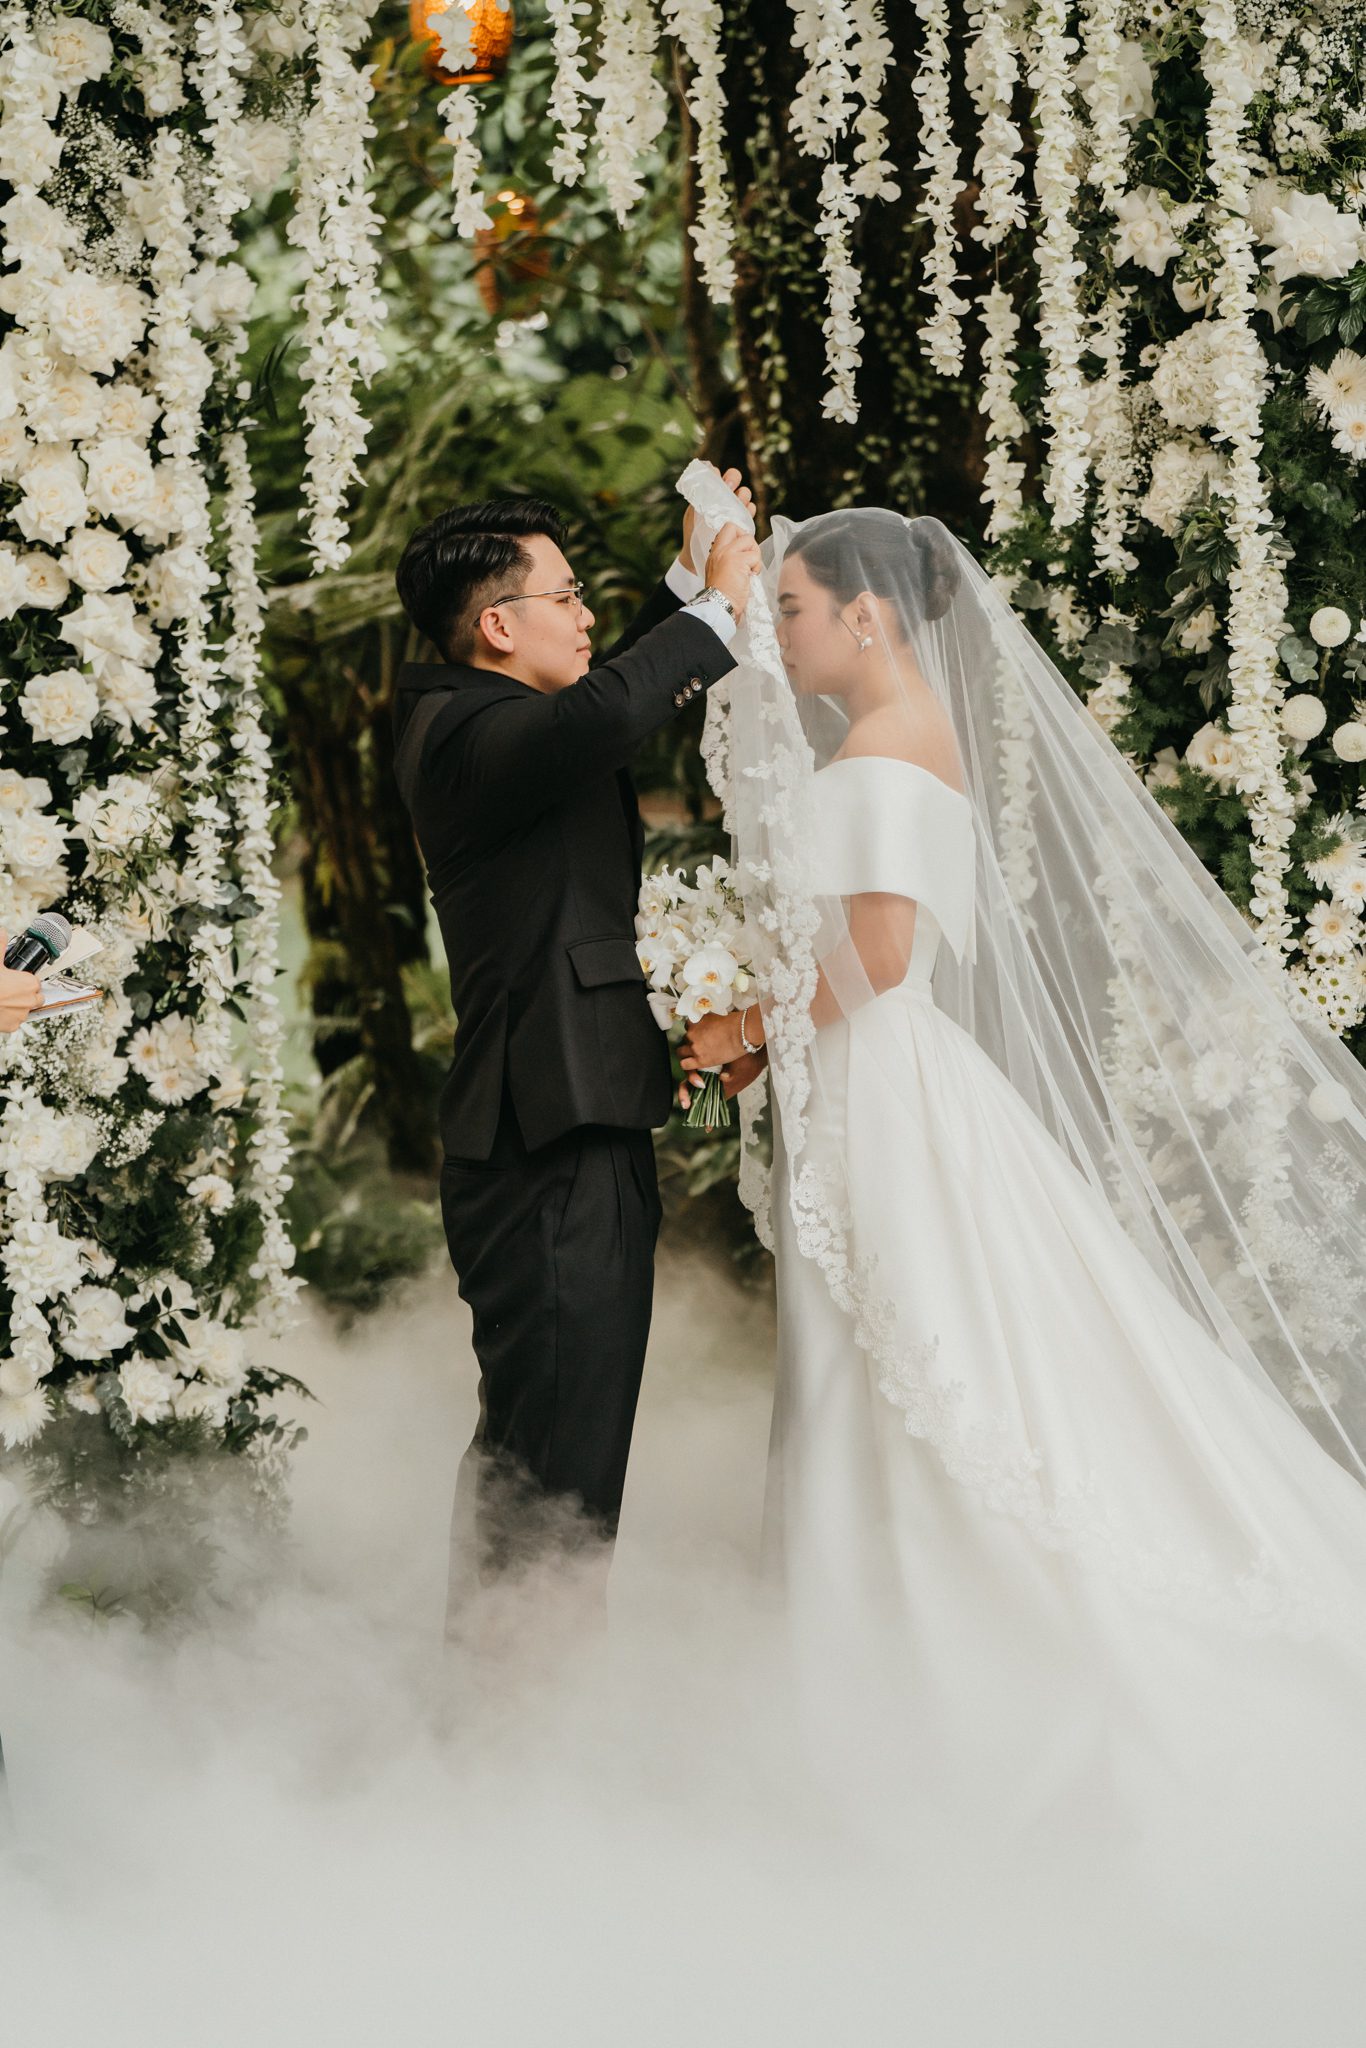 Saigon intimate wedding at An Lam Retreat 5538 - The Planners